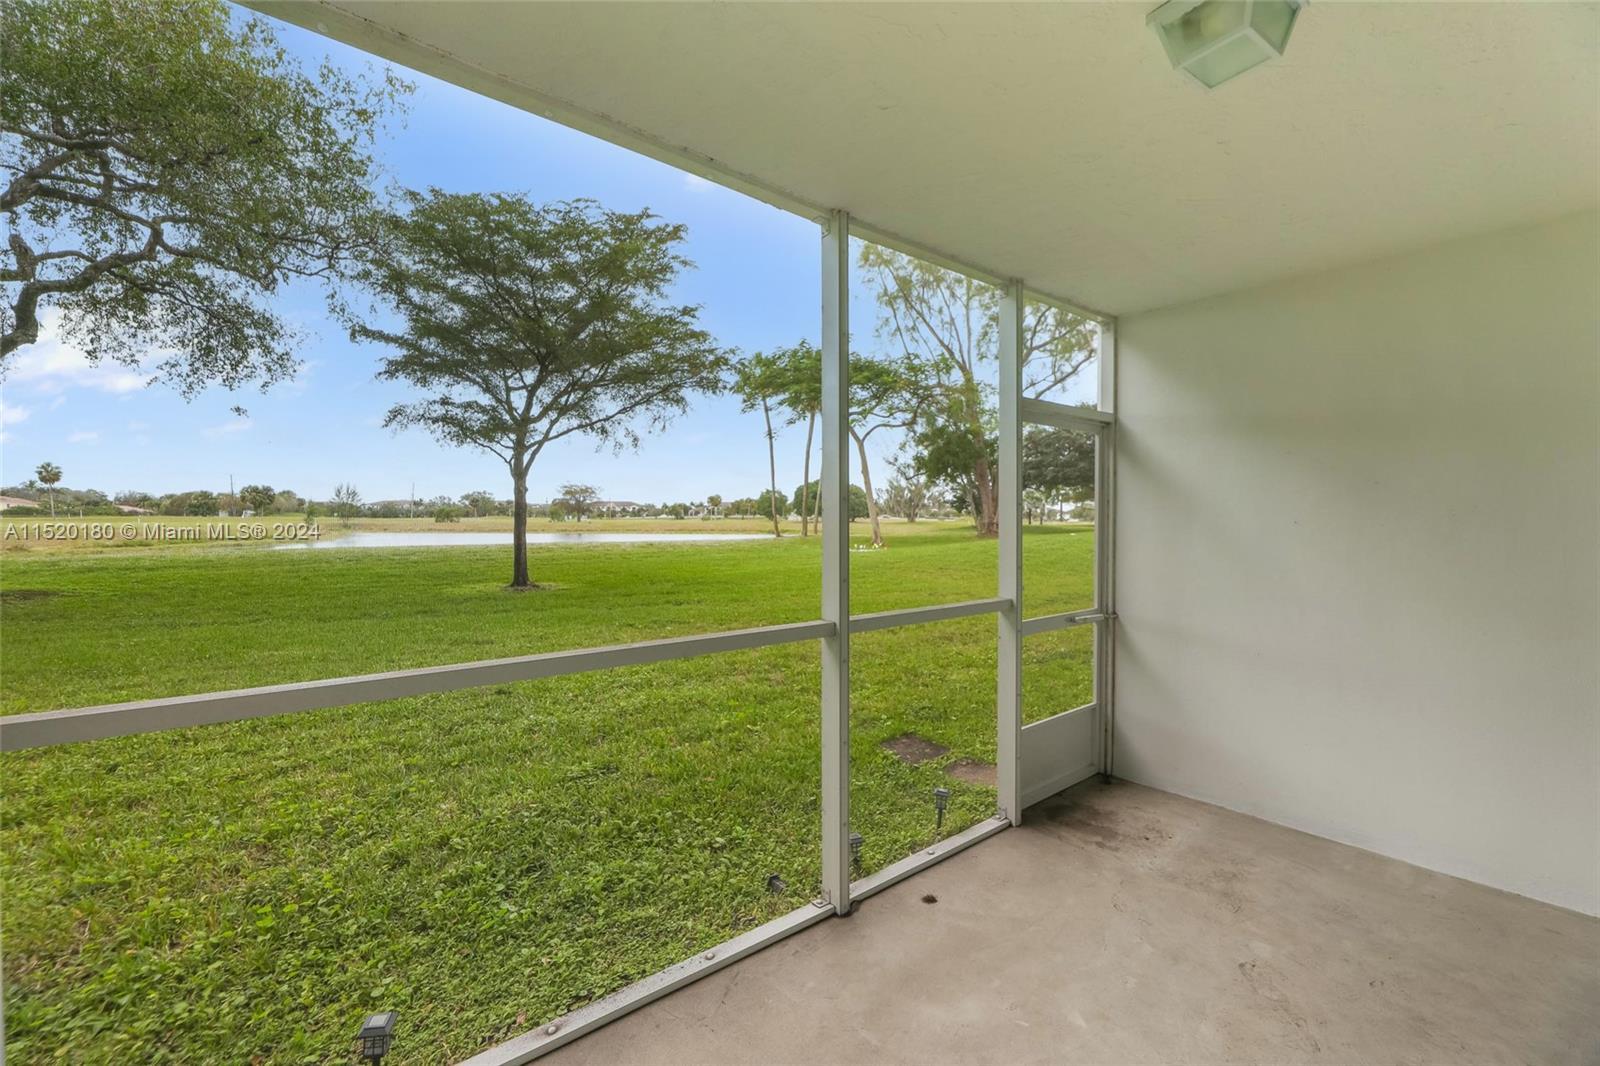 Photo of 3080 N Course Dr #102 in Pompano Beach, FL